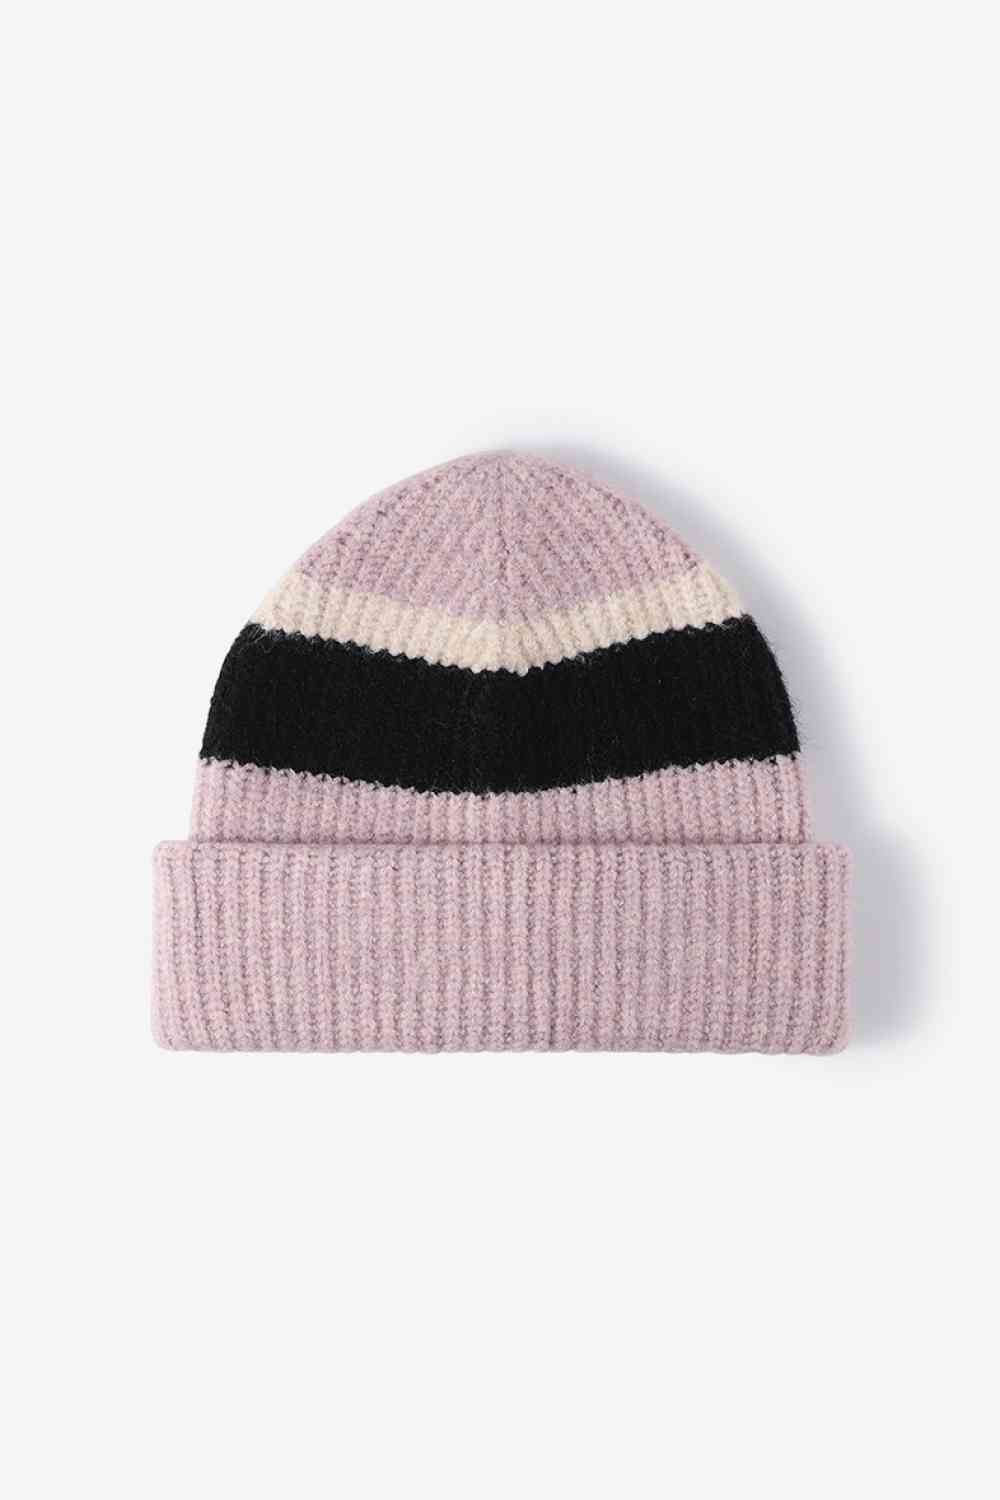 Lavender Tricolor Cuffed Knit Beanie Sentient Beauty Fashions *Accessories